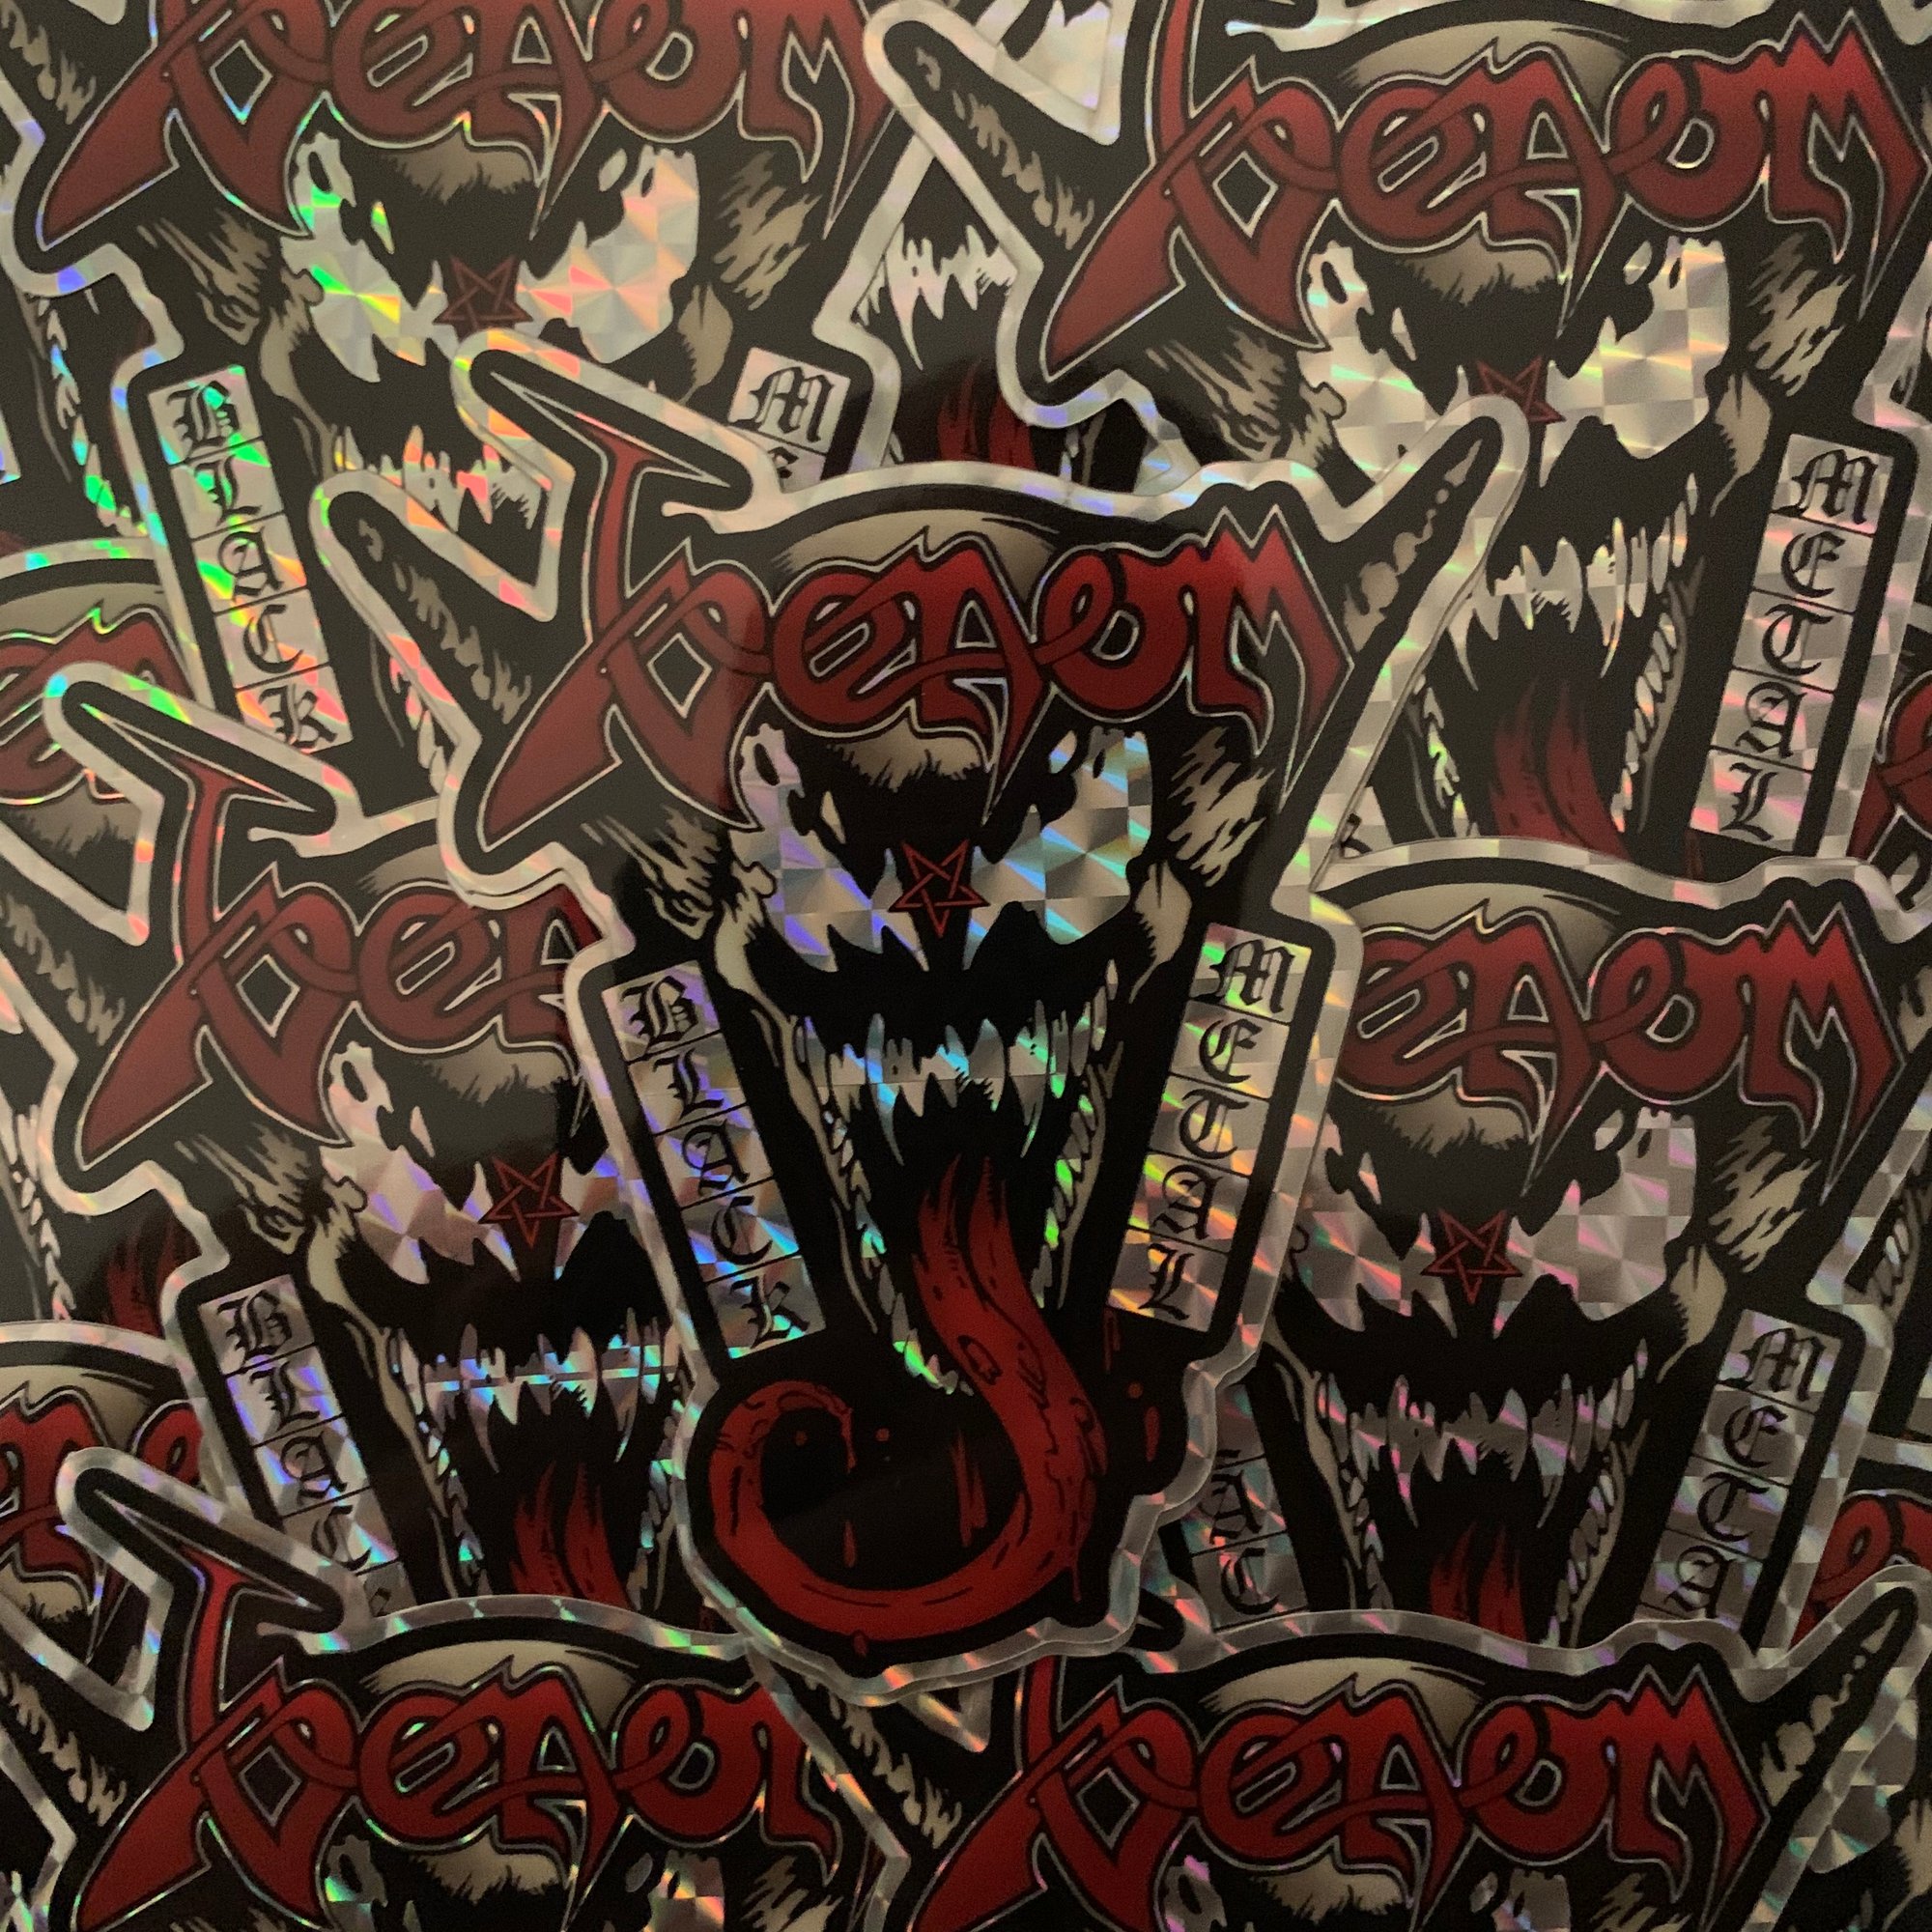 https://assets.bigcartel.com/product_images/255755621/Venom+-+Black+Metal+by+DeathStyle+Art+_Sticker+For+Site+Use+Only_.jpg?auto=format&fit=max&w=2000